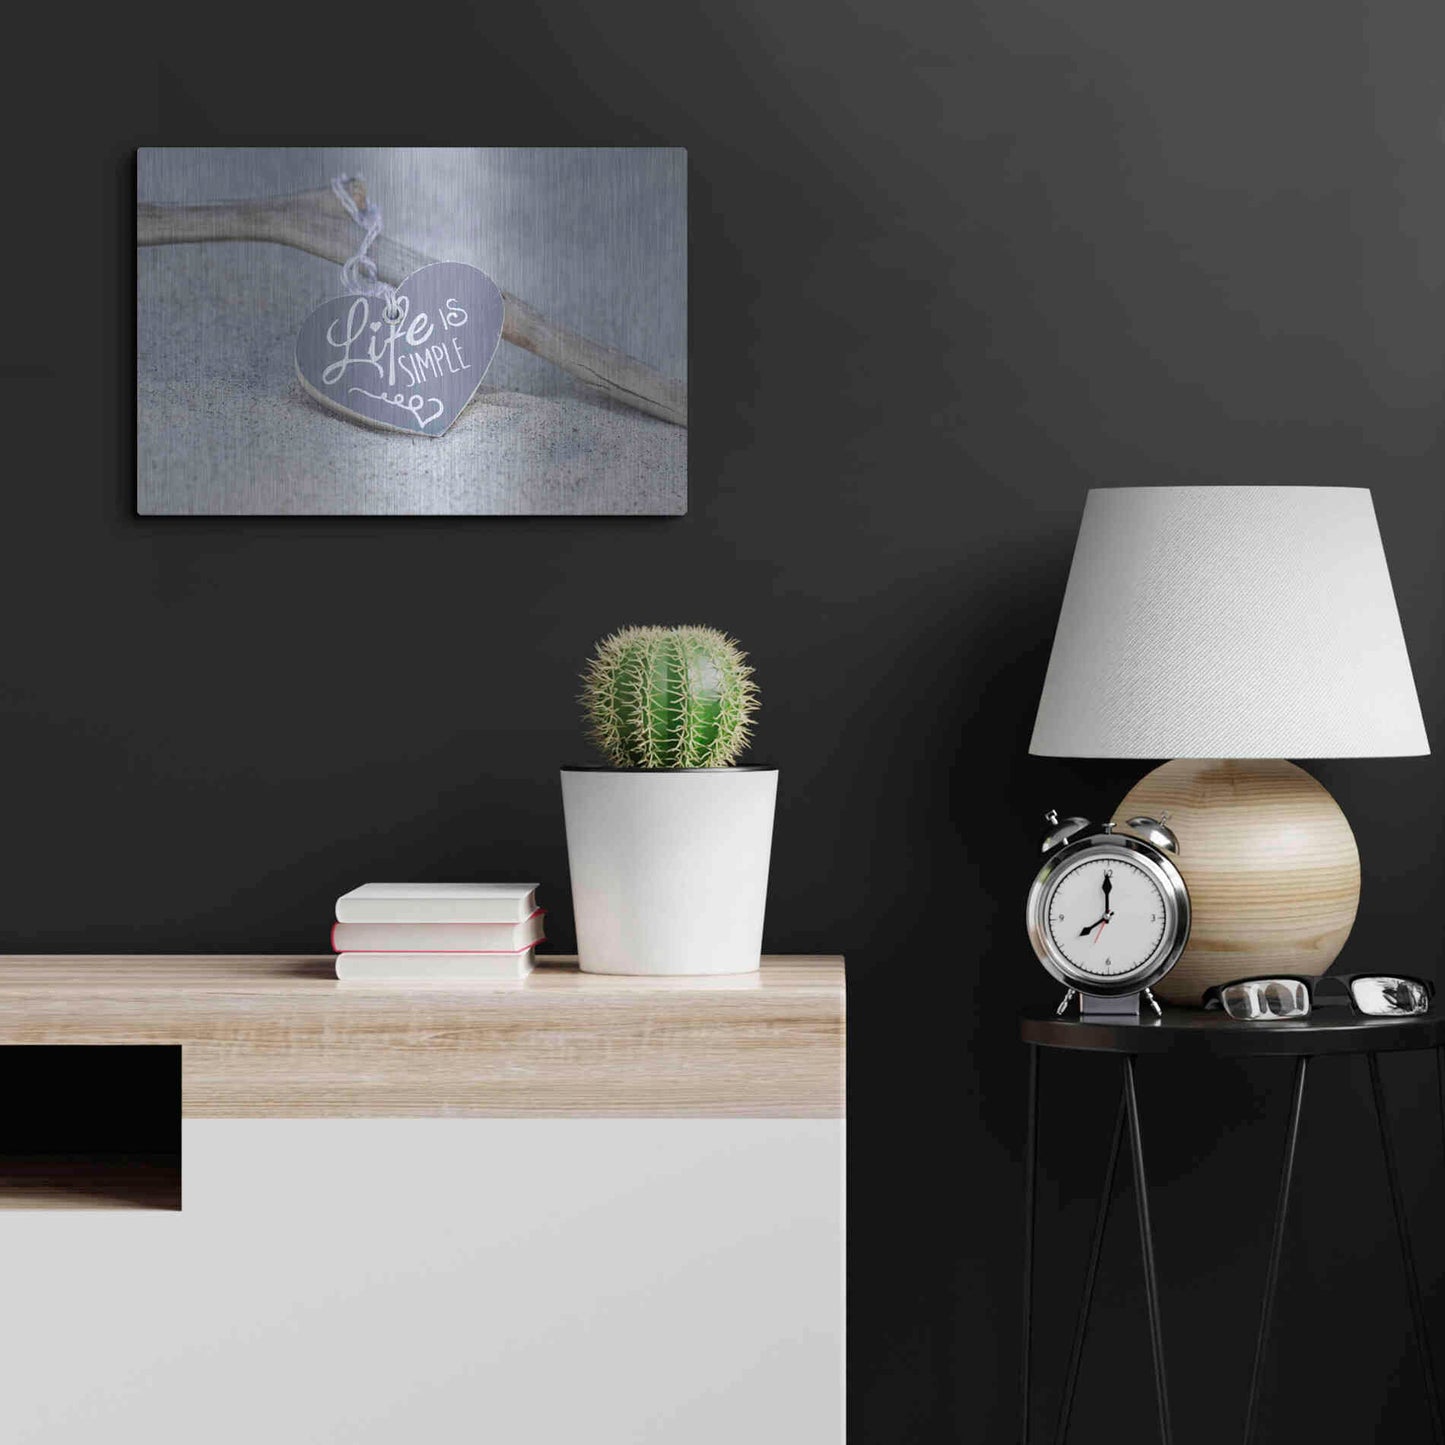 Luxe Metal Art 'Life Is Simple Still' by Andrea Haase, Metal Wall At,24x16